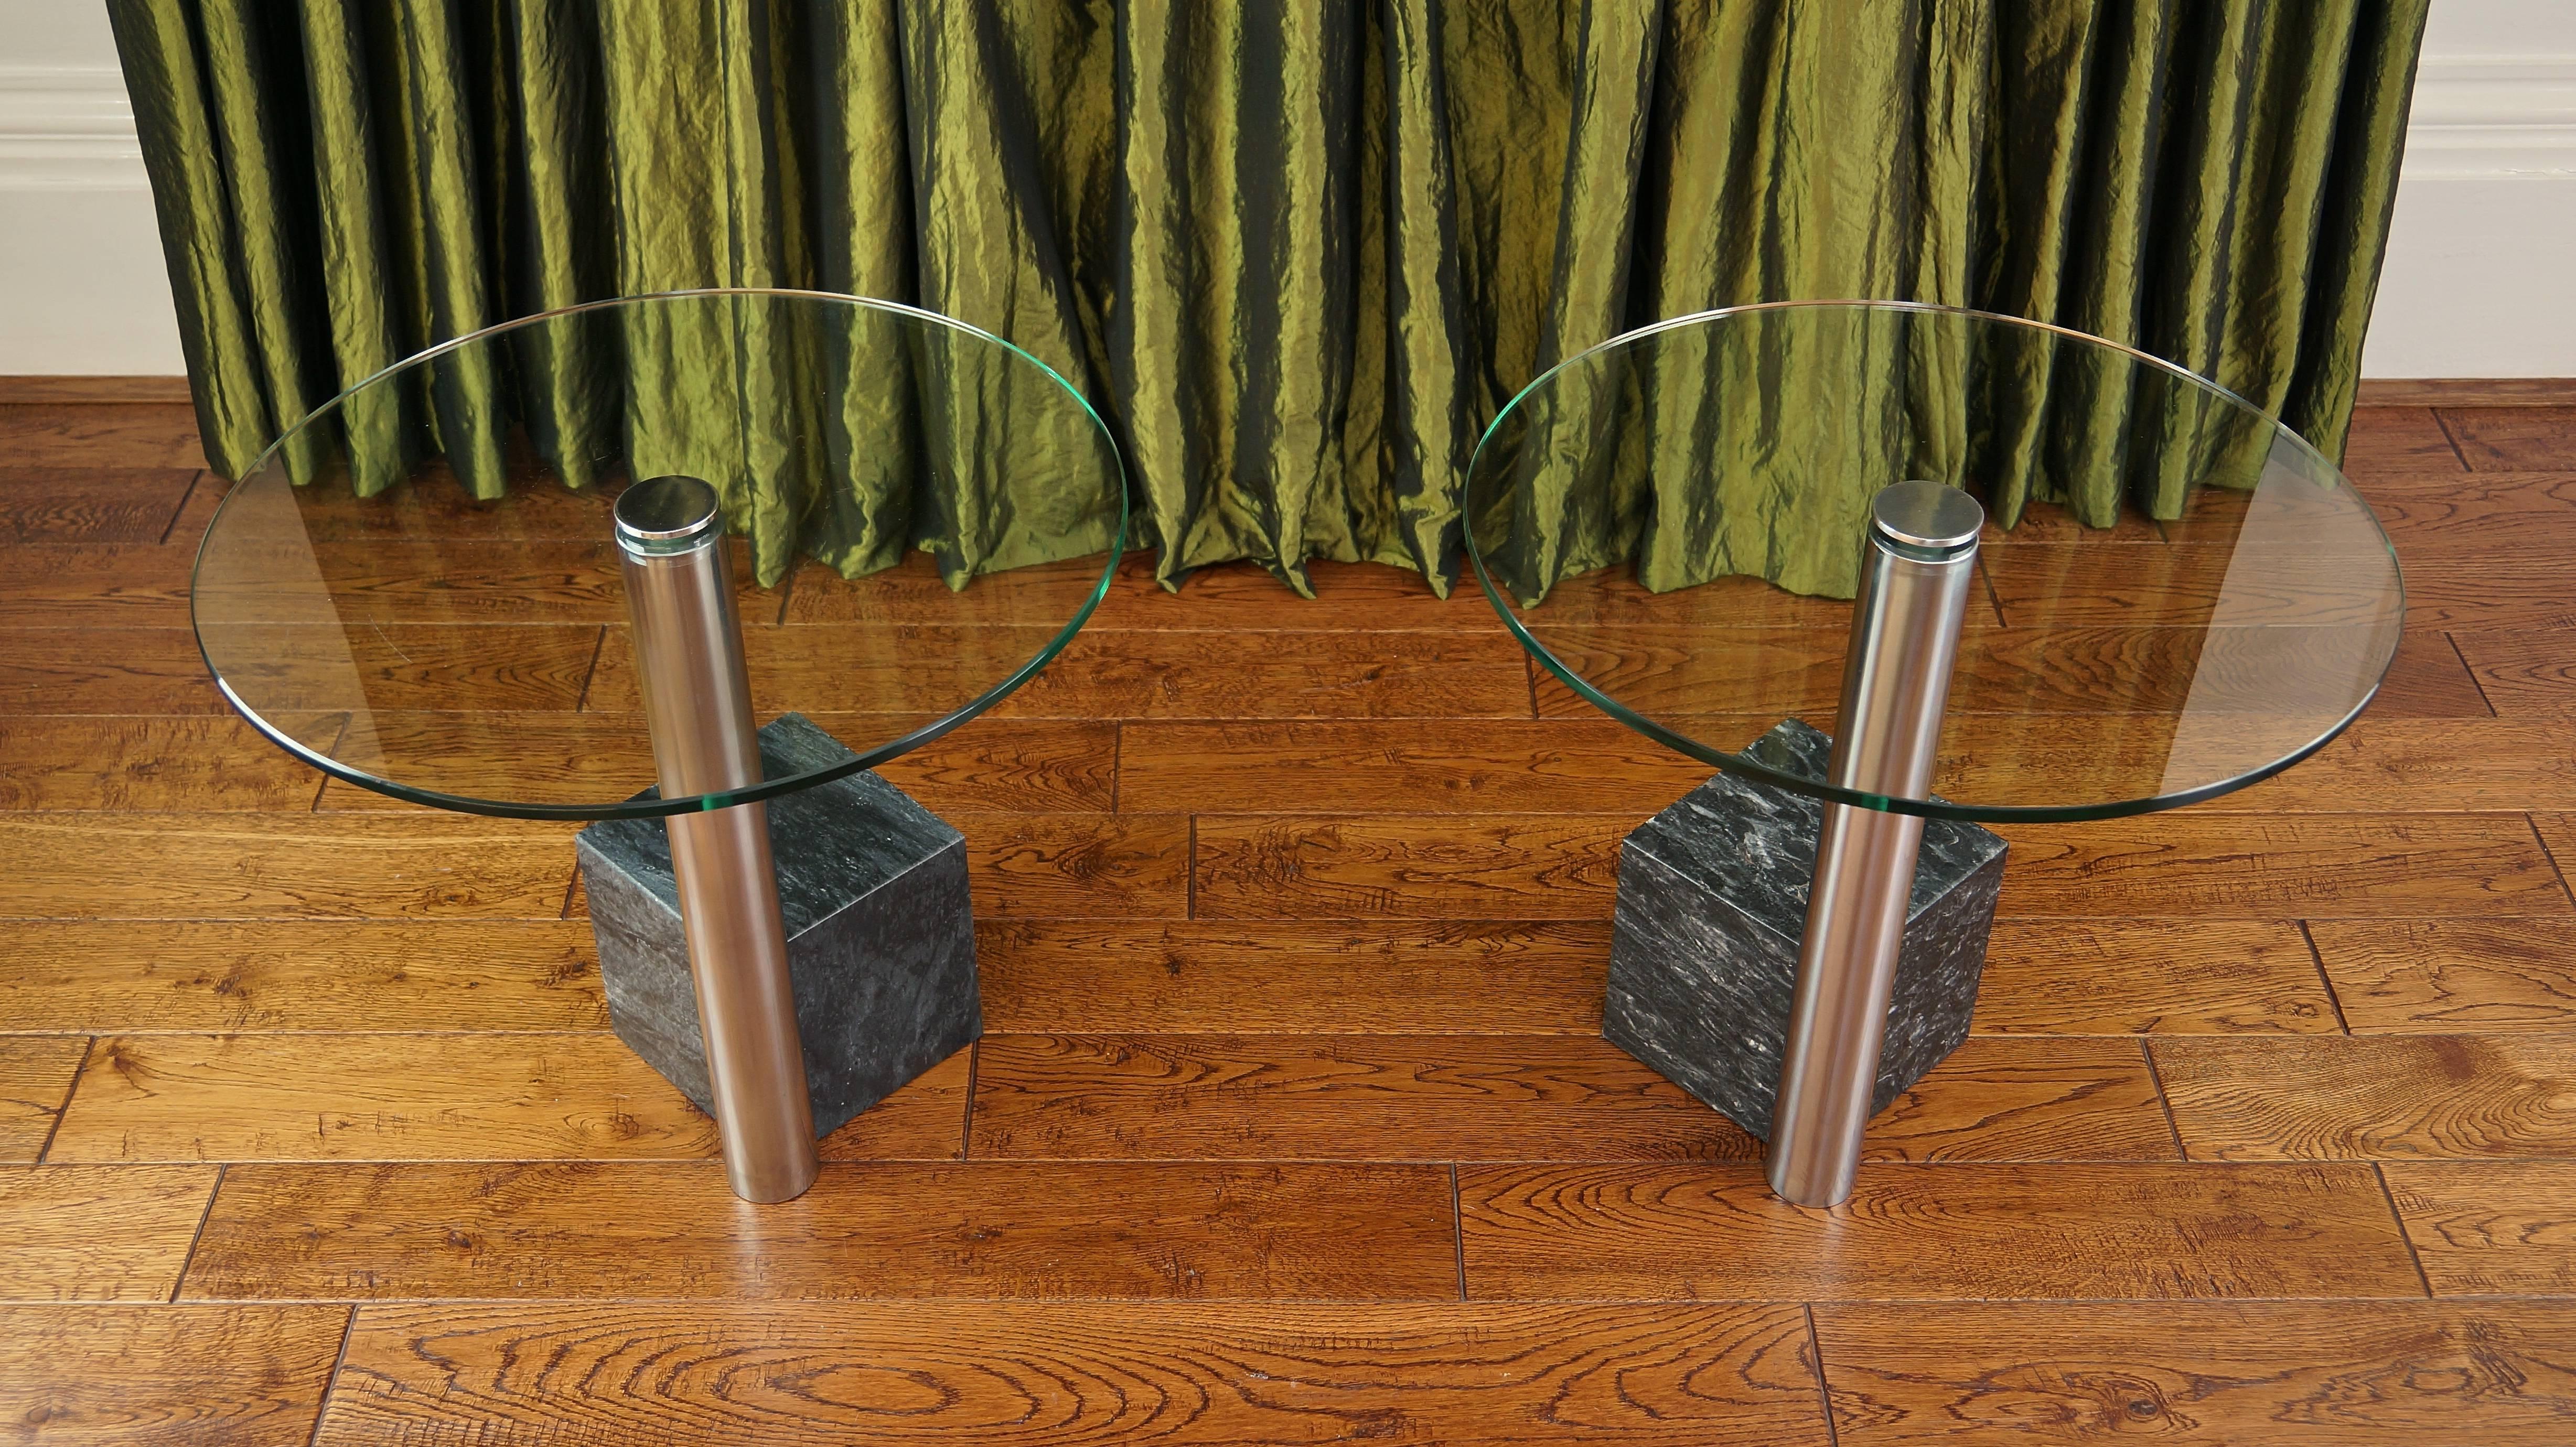 Late 20th Century Pair of Vintage Marble and Glass HK2 Side Tables by Hank Kwint, Metaform 1980s